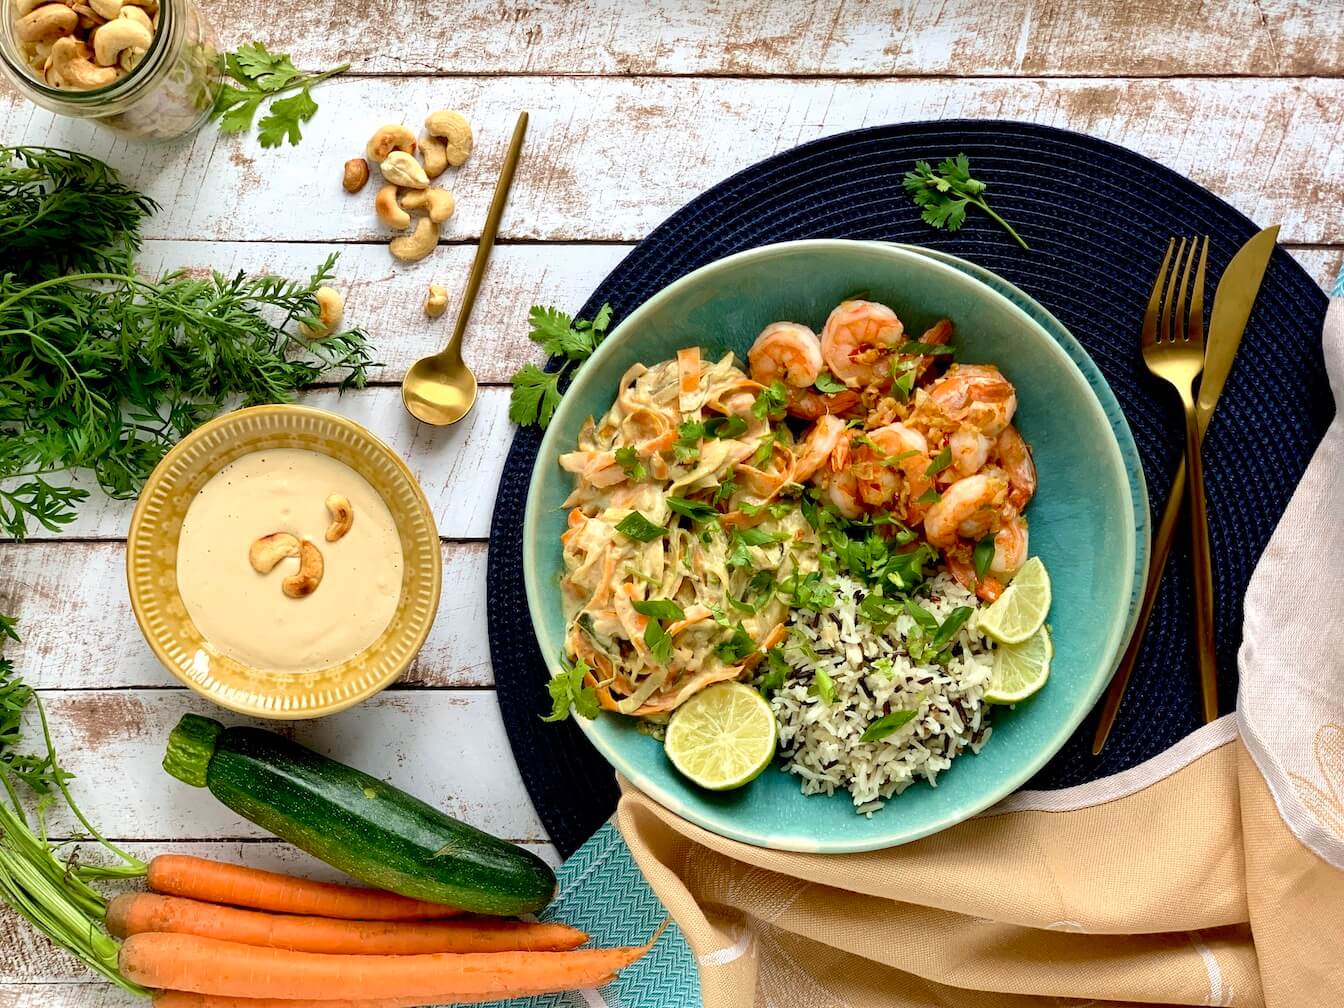 Prawns on Zucchini and Carrot Noodles